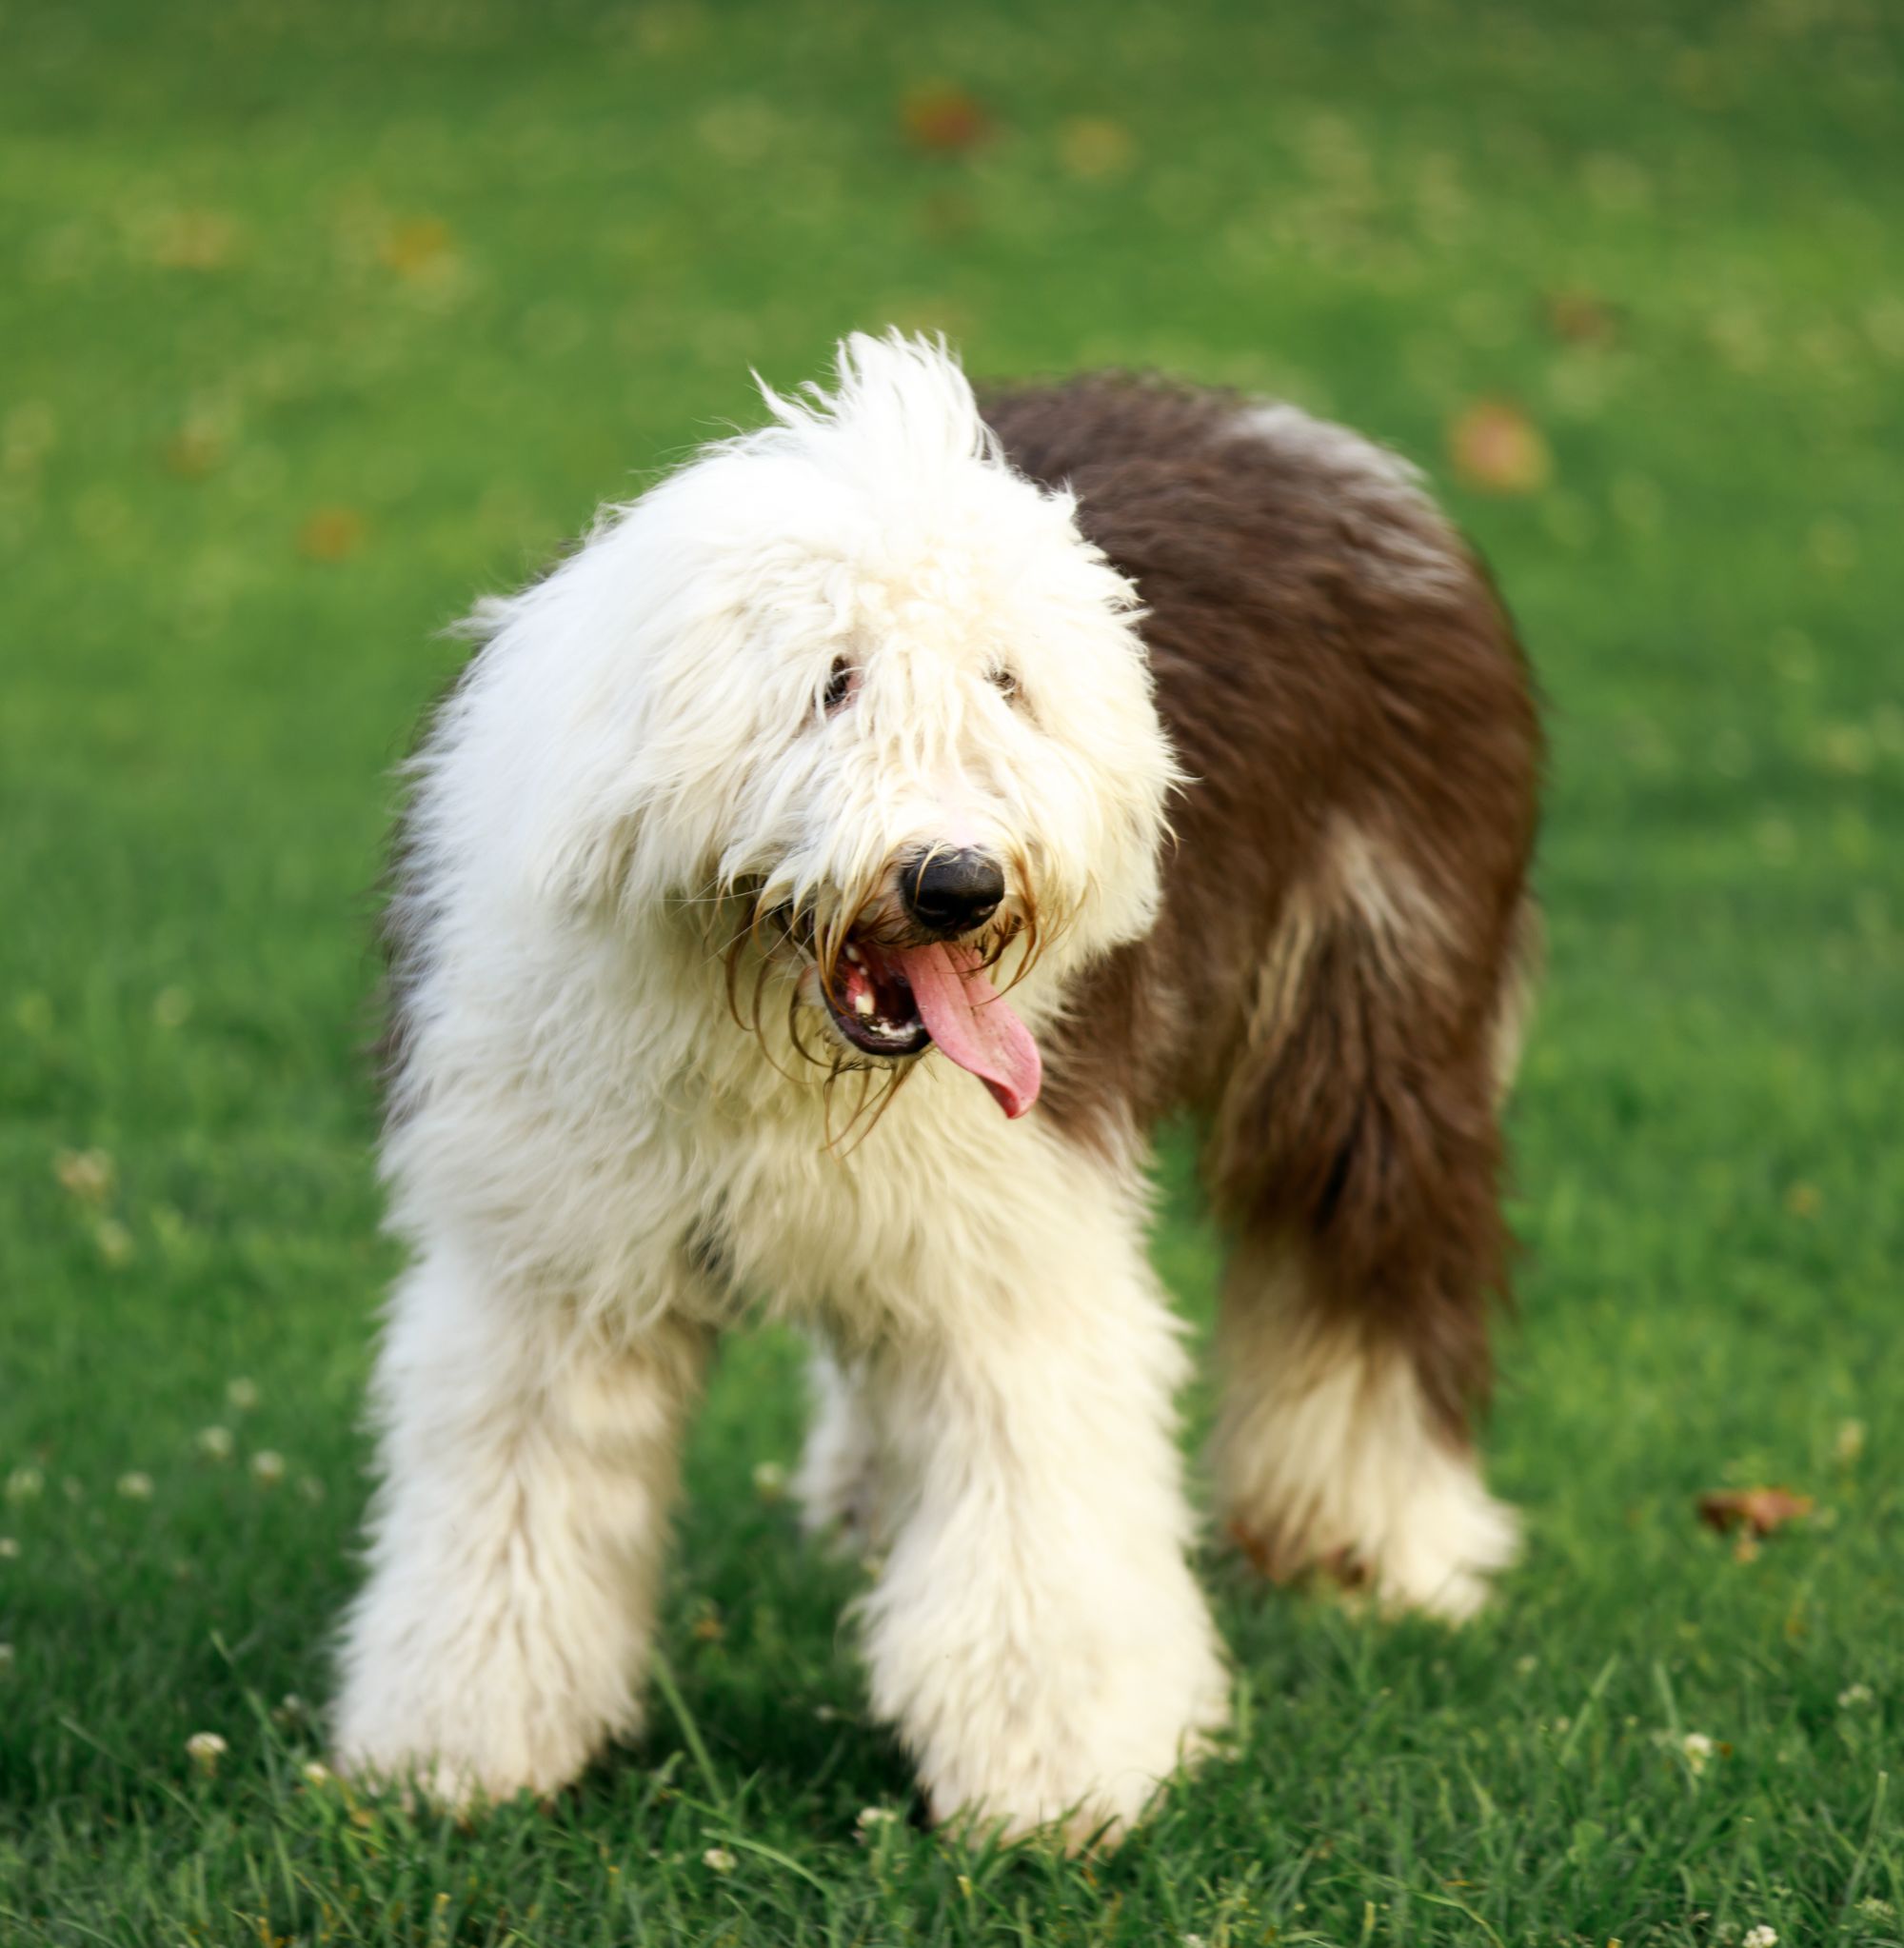 Old English Sheepdog standing on grass